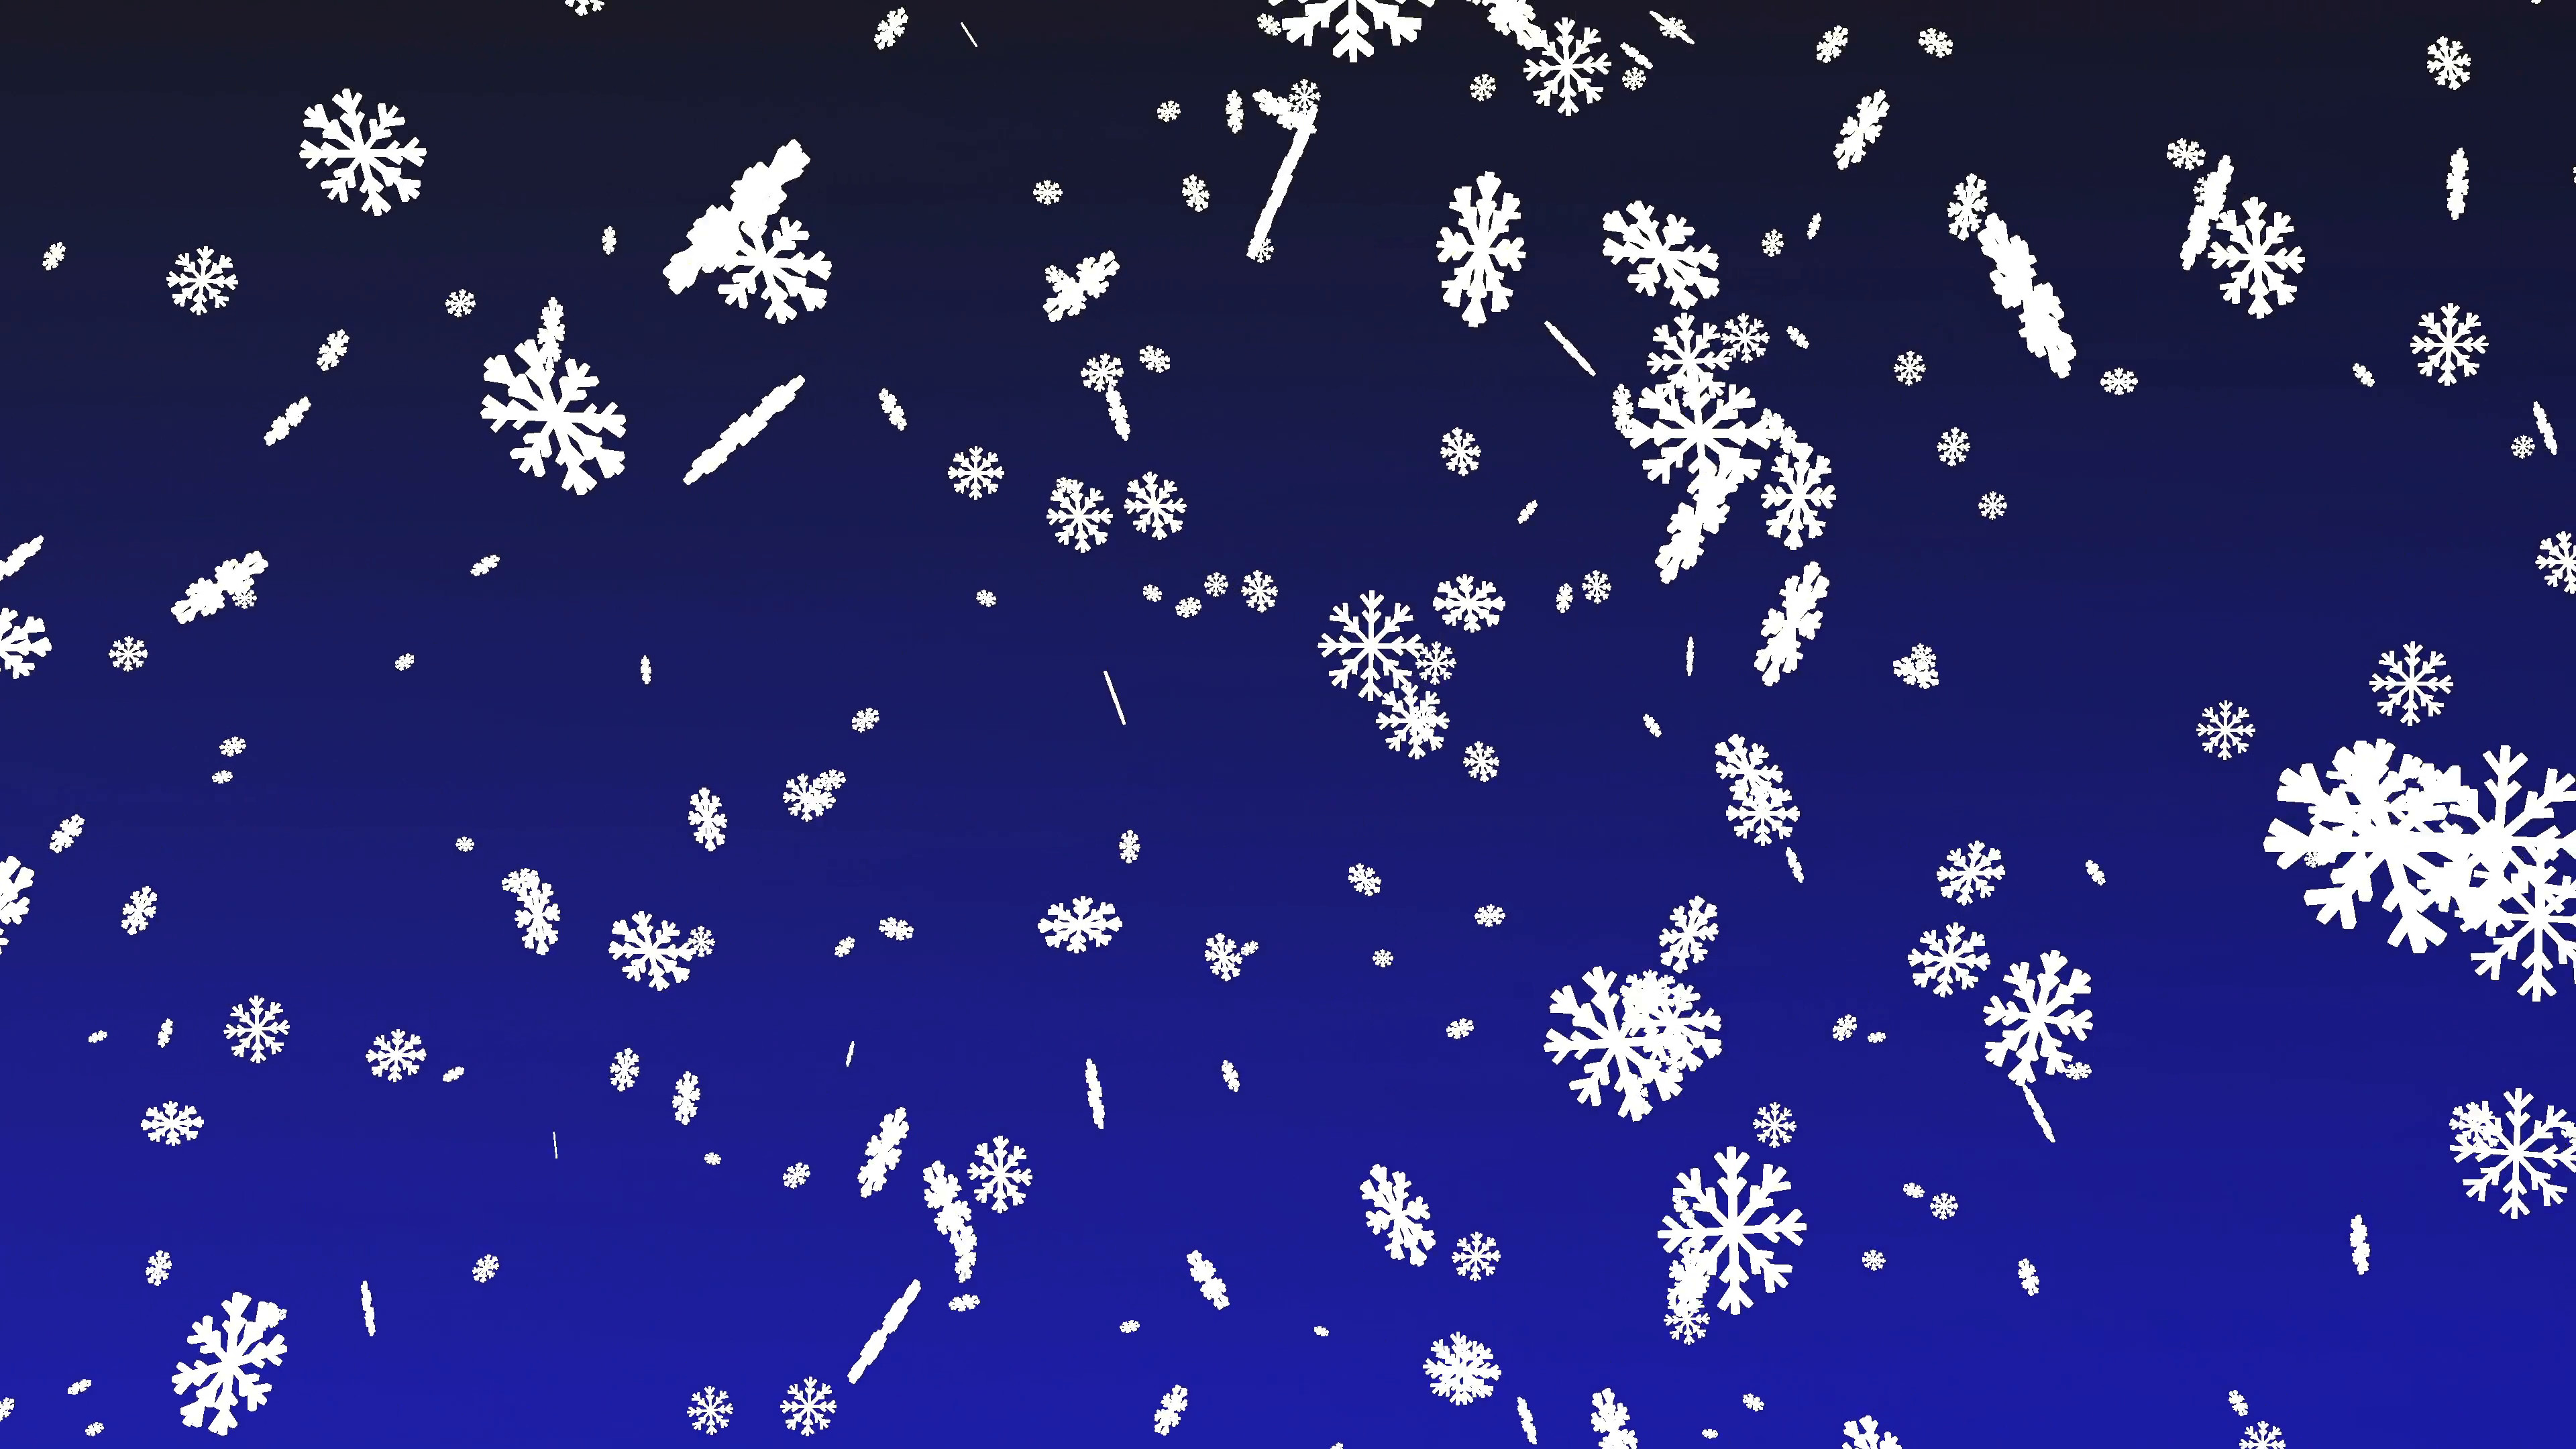 3840x2160 Decorative blue Christmas background with snowflake